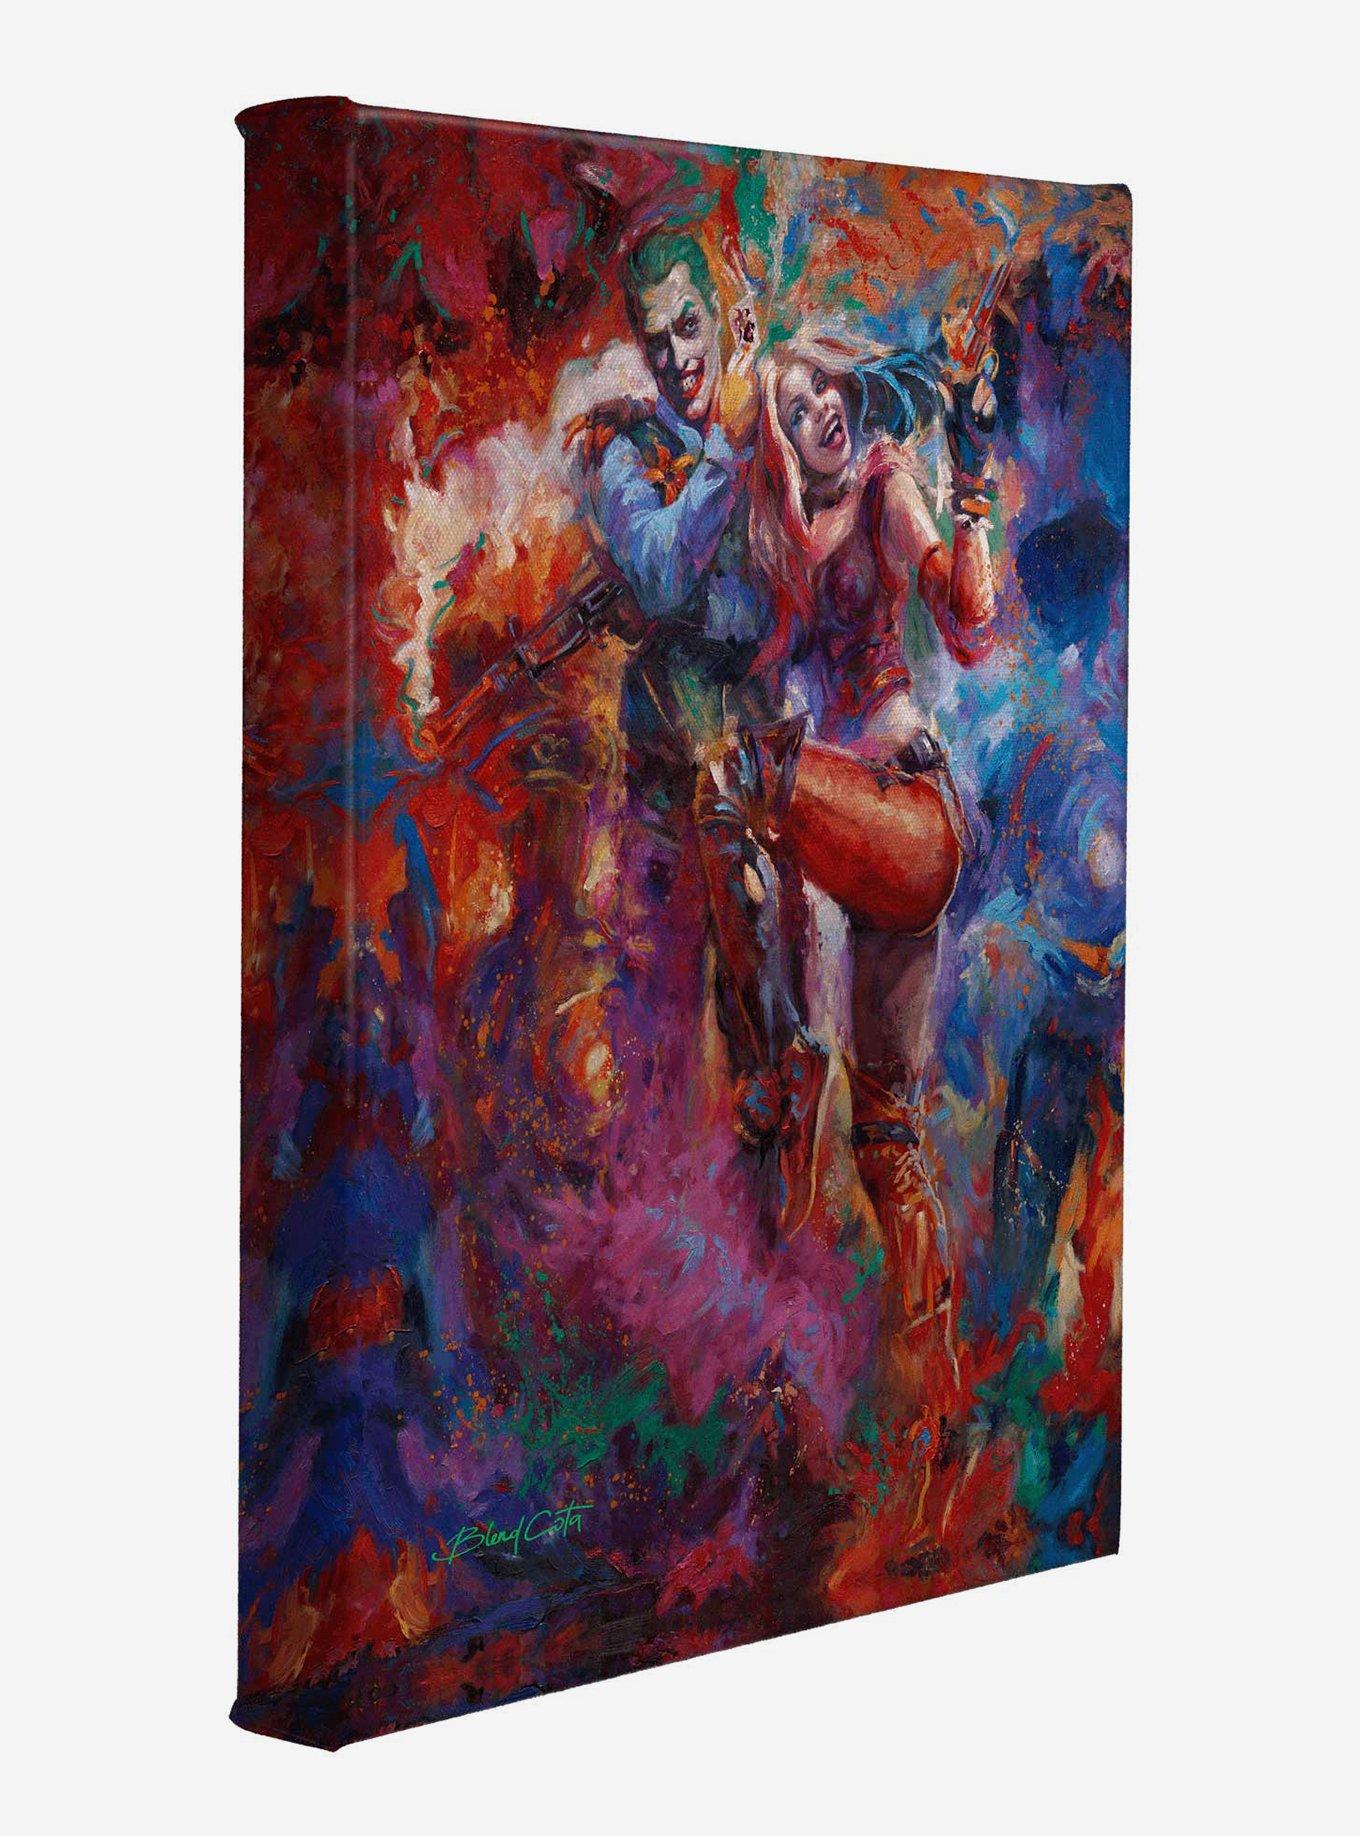 DC Comics The Joker and Harley Quinn 14" x 11" Gallery Wrapped Canvas 